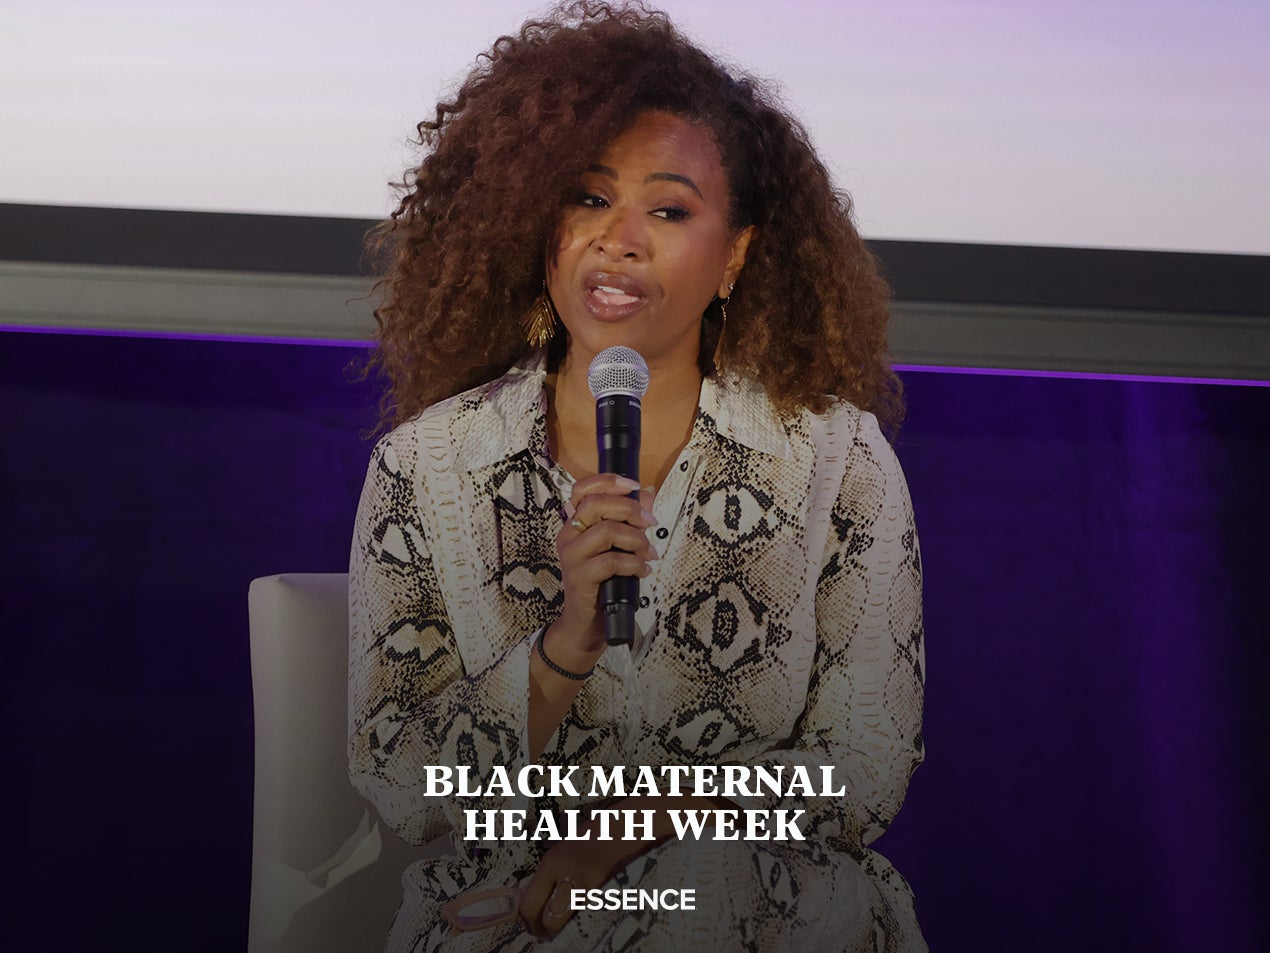 After A Stressful Delivery Experience, ‘Mamaste’ Host Tanika Ray Wants Pregnant Black Women To Know All Their Options